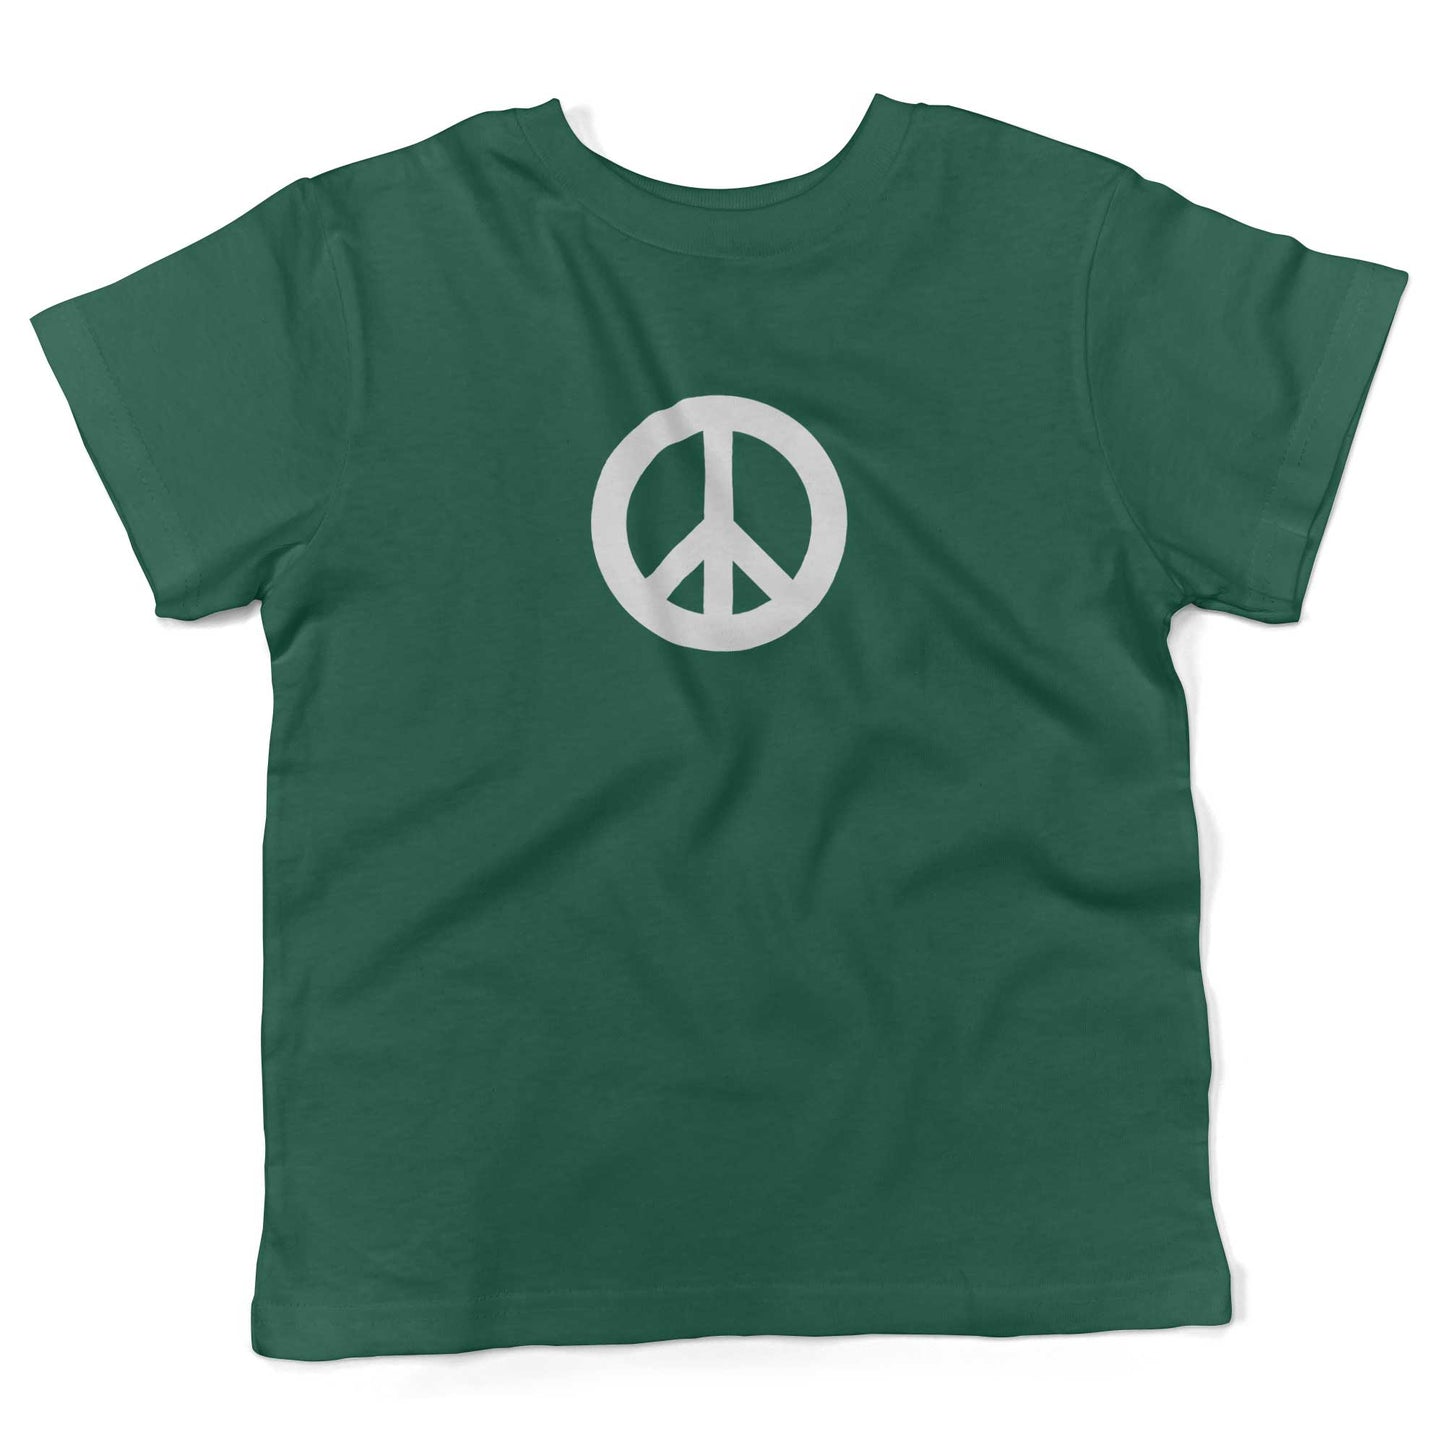 Peace Sign Toddler Shirt-Kelly Green-2T